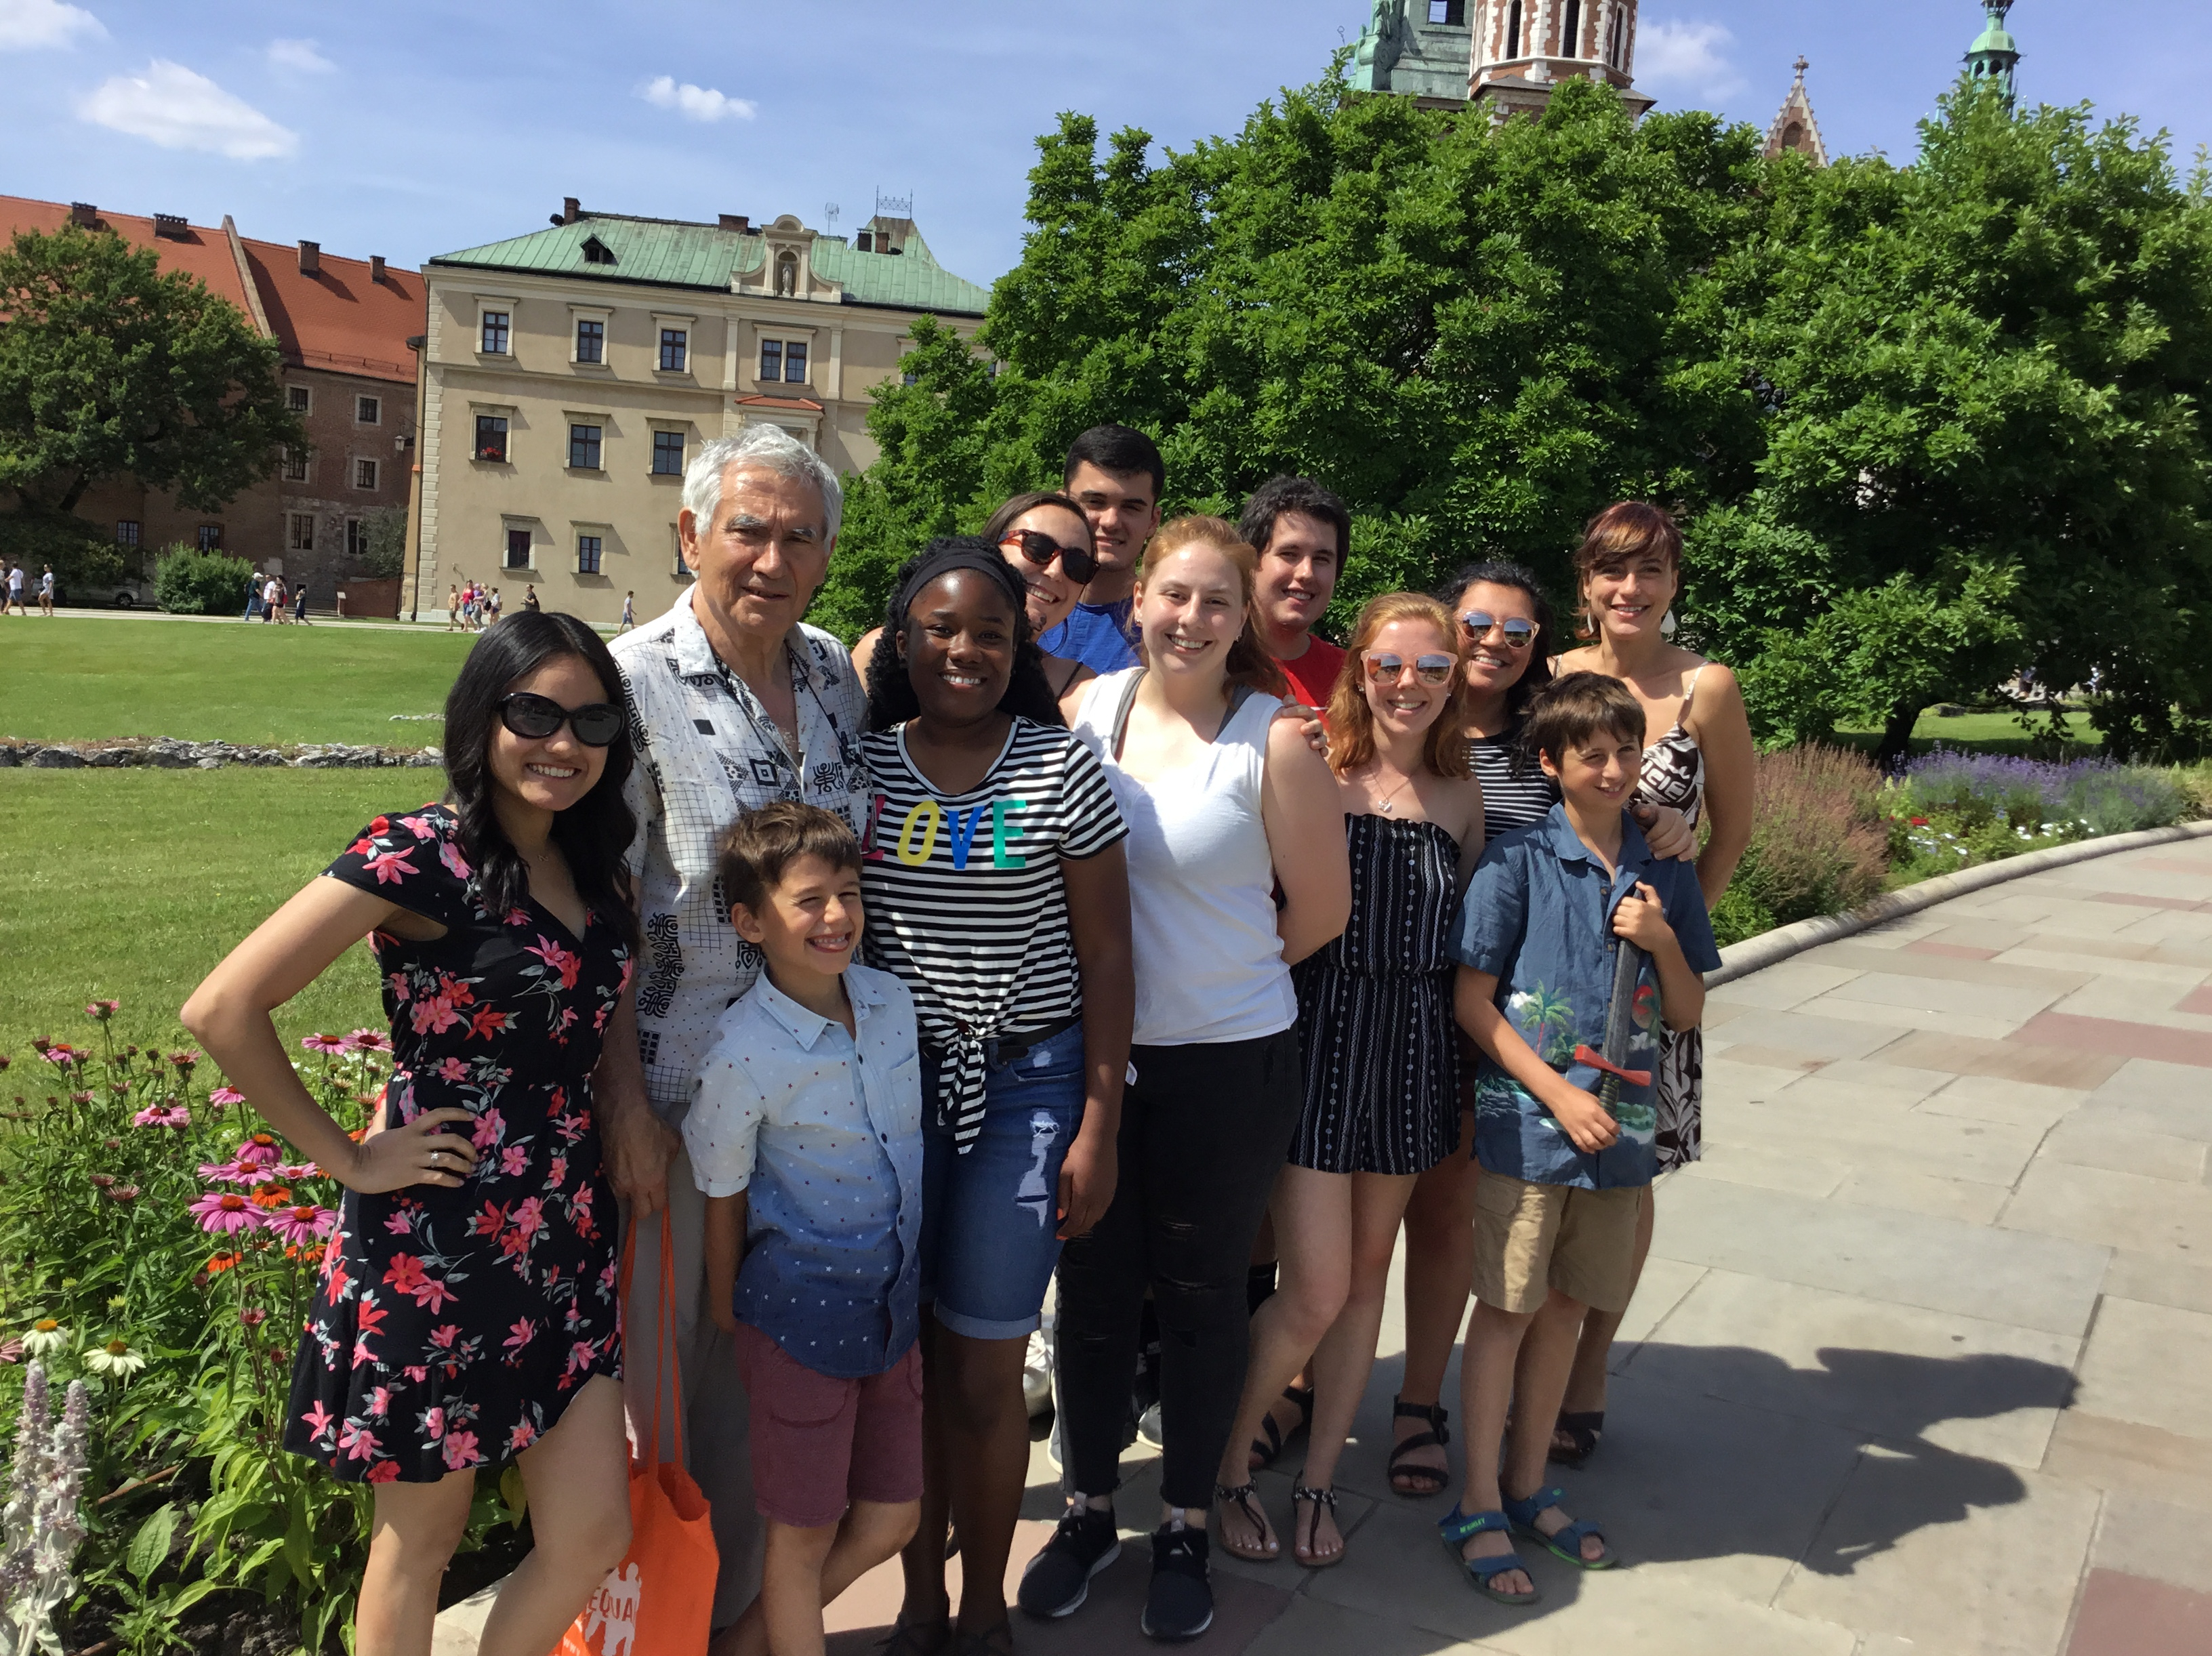 The Ohio State Summer School in Social Sciences in Poland 2019